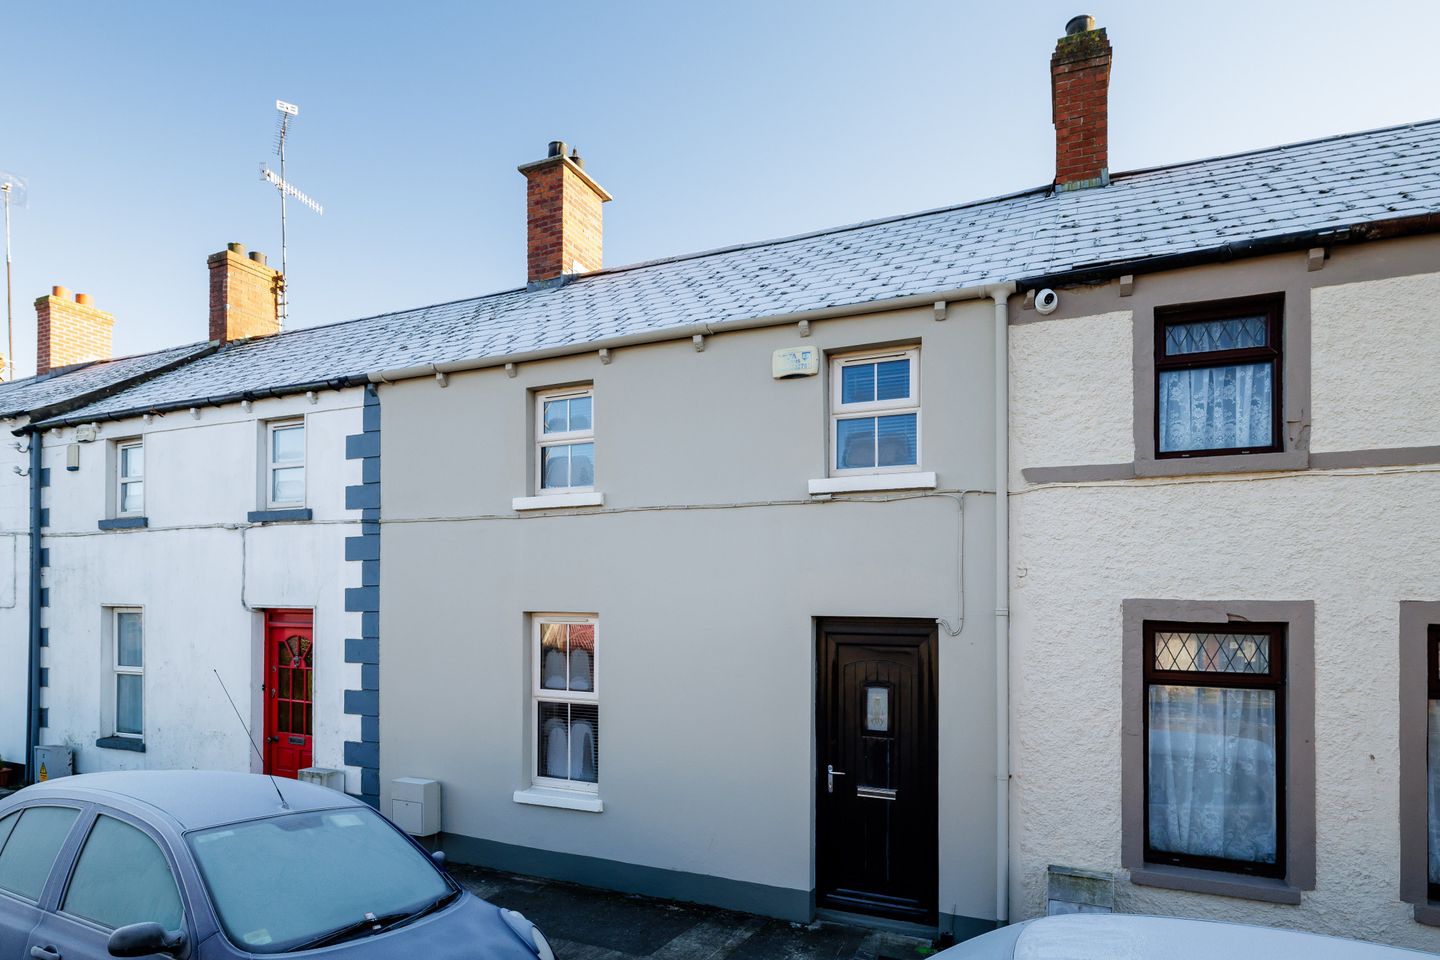 6 Hill Street East, Dundalk, Co Louth, A91F9T8